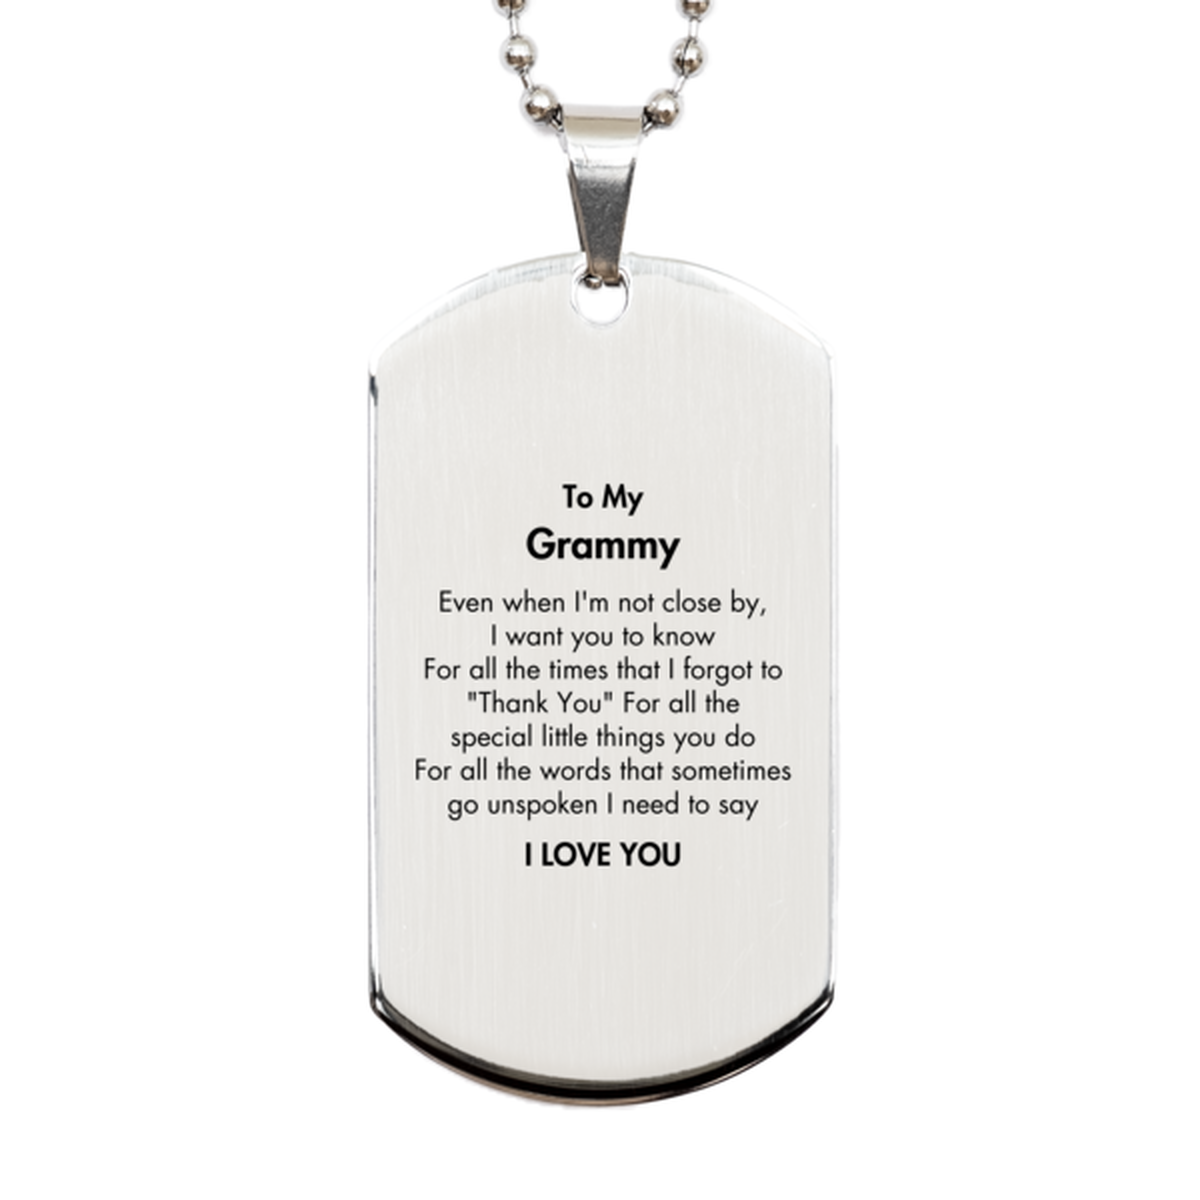 Thank You Gifts for Grammy, Keepsake Silver Dog Tag Gifts for Grammy Birthday Mother's day Father's Day Grammy For all the words That sometimes go unspoken I need to say I LOVE YOU